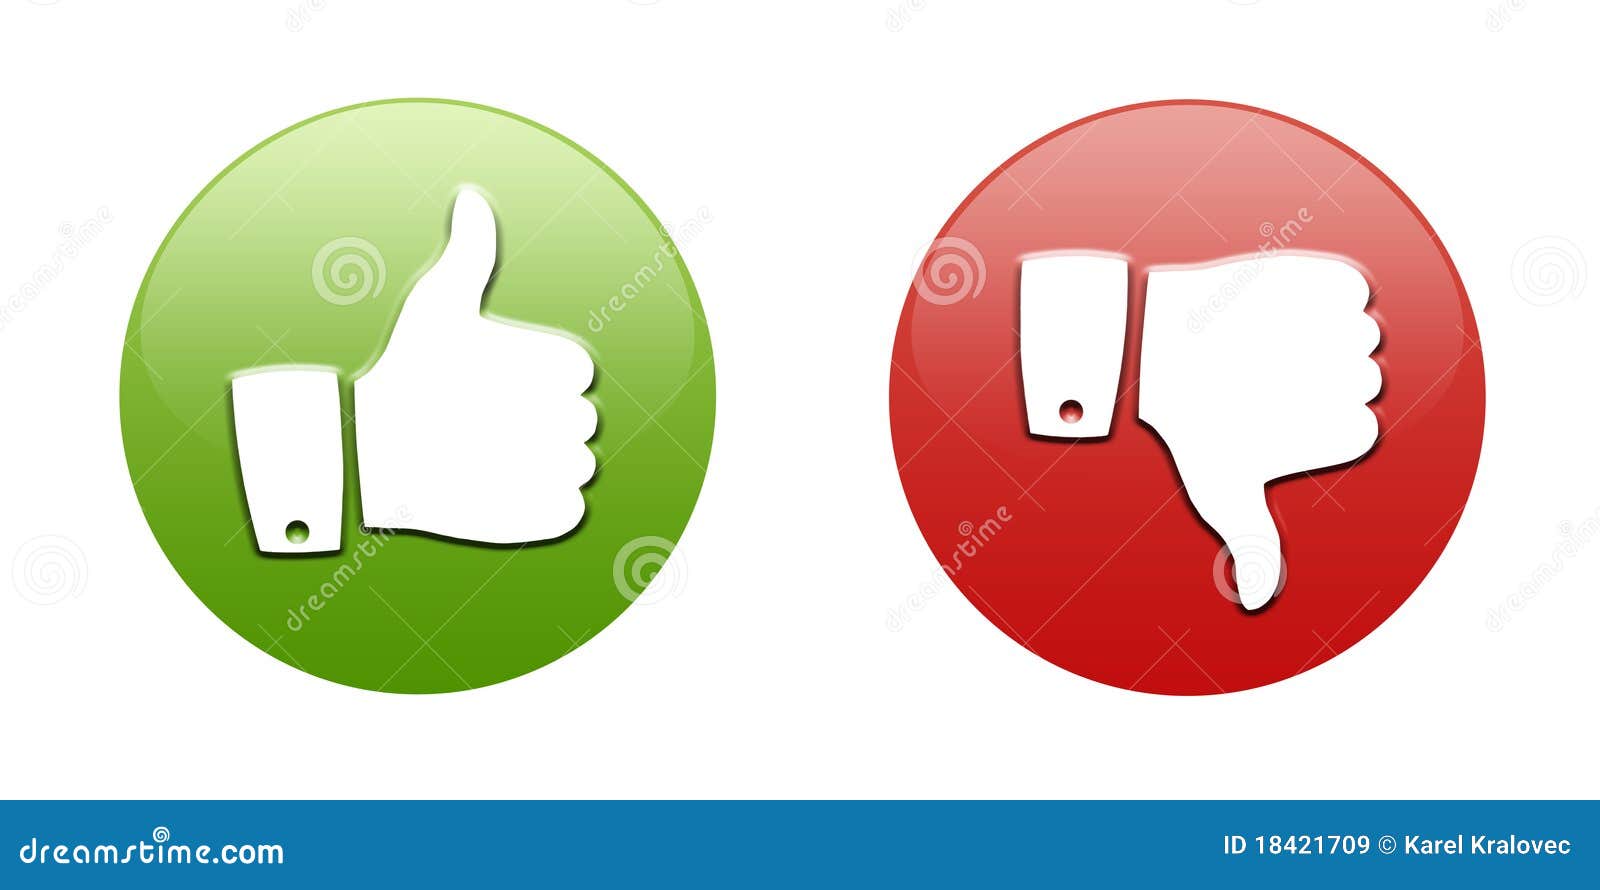 Thumbs Up Thumbs Down Stock Illustrations 1 686 Thumbs Up Thumbs Down Stock Illustrations Vectors Clipart Dreamstime